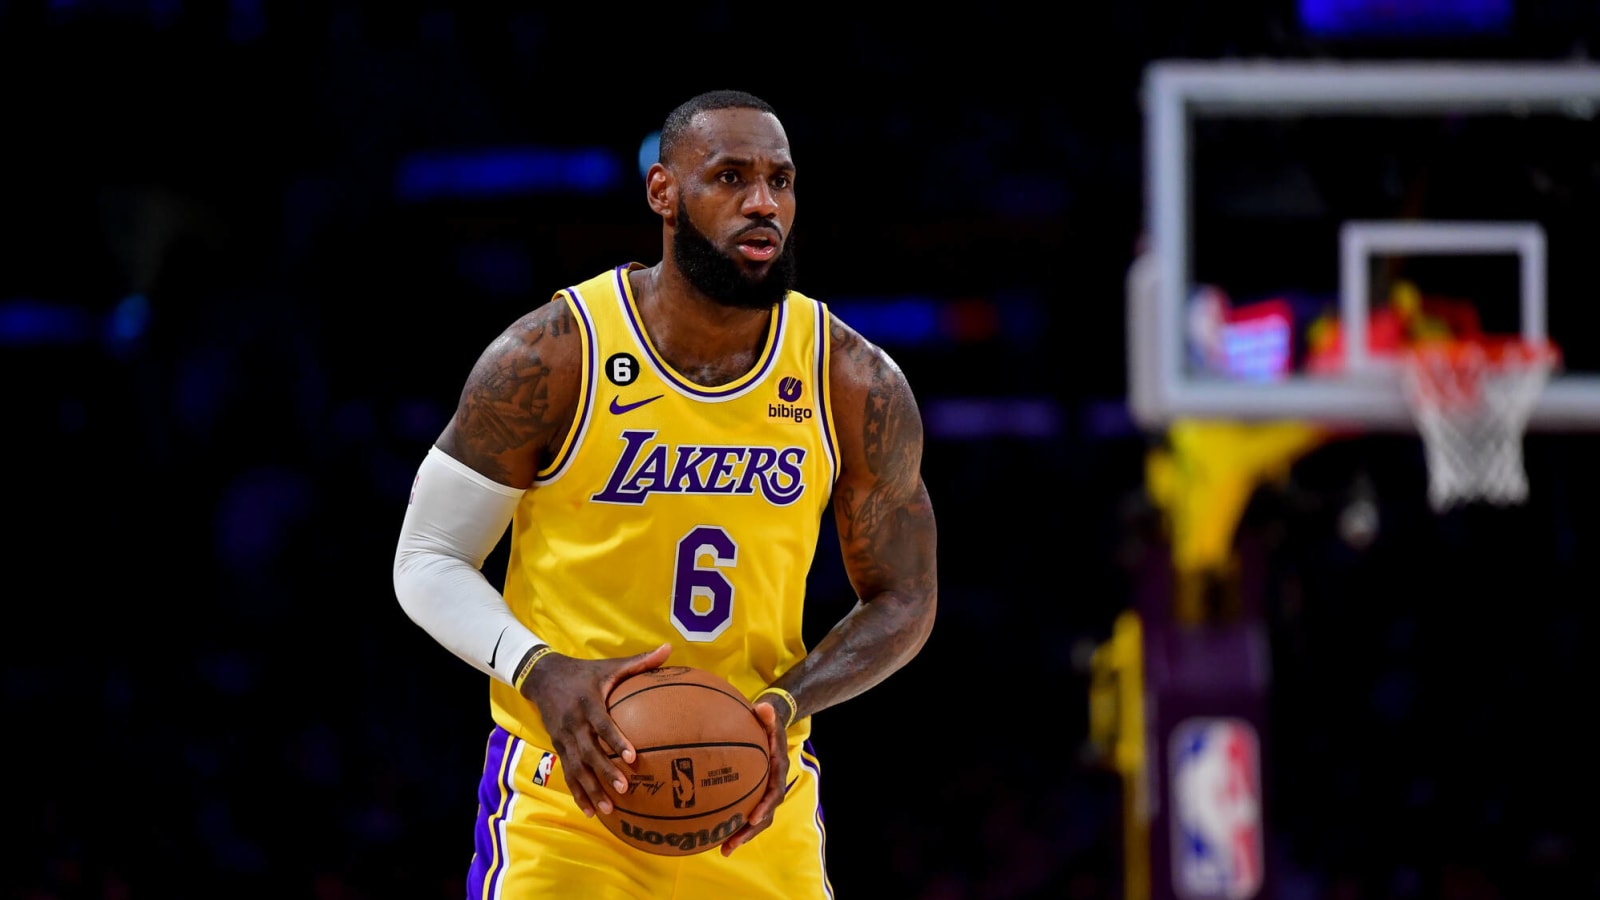  Jeanie Buss Wanted To Give LeBron James Space When Deciding On Potential Retirement